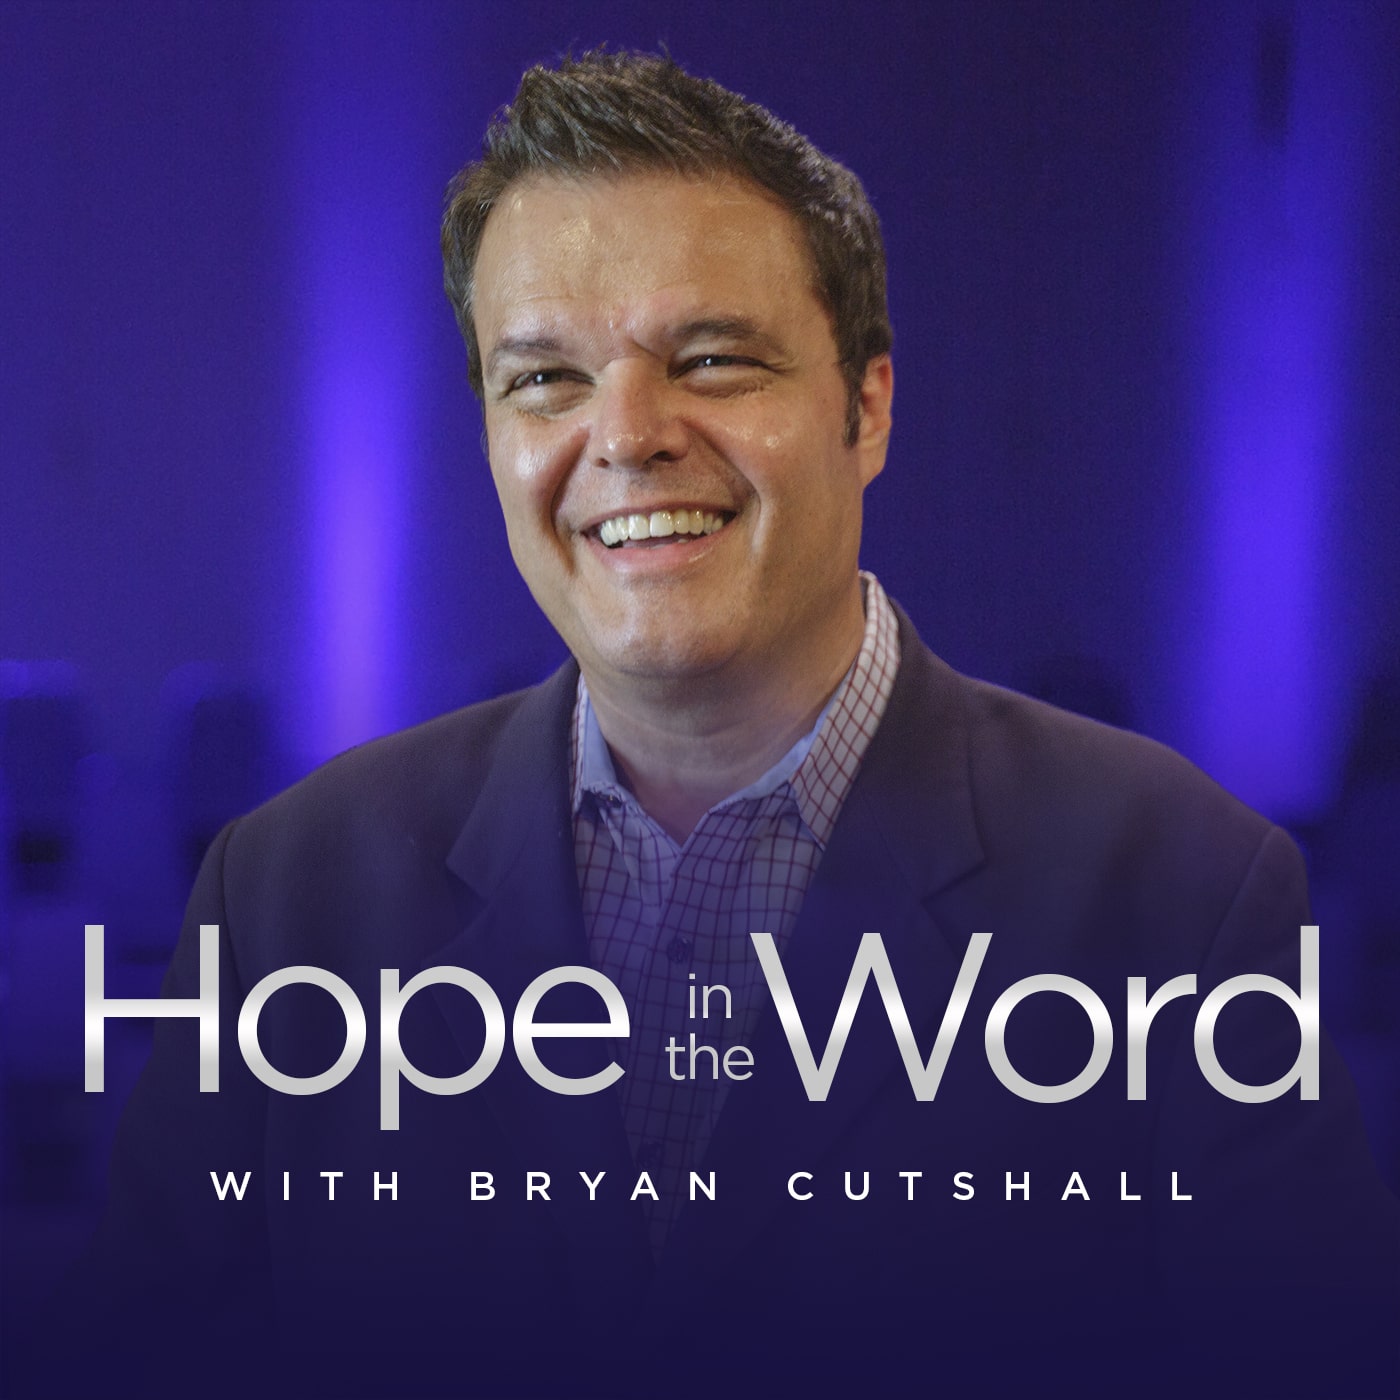 Hope In the Word with Bryan Cutshall